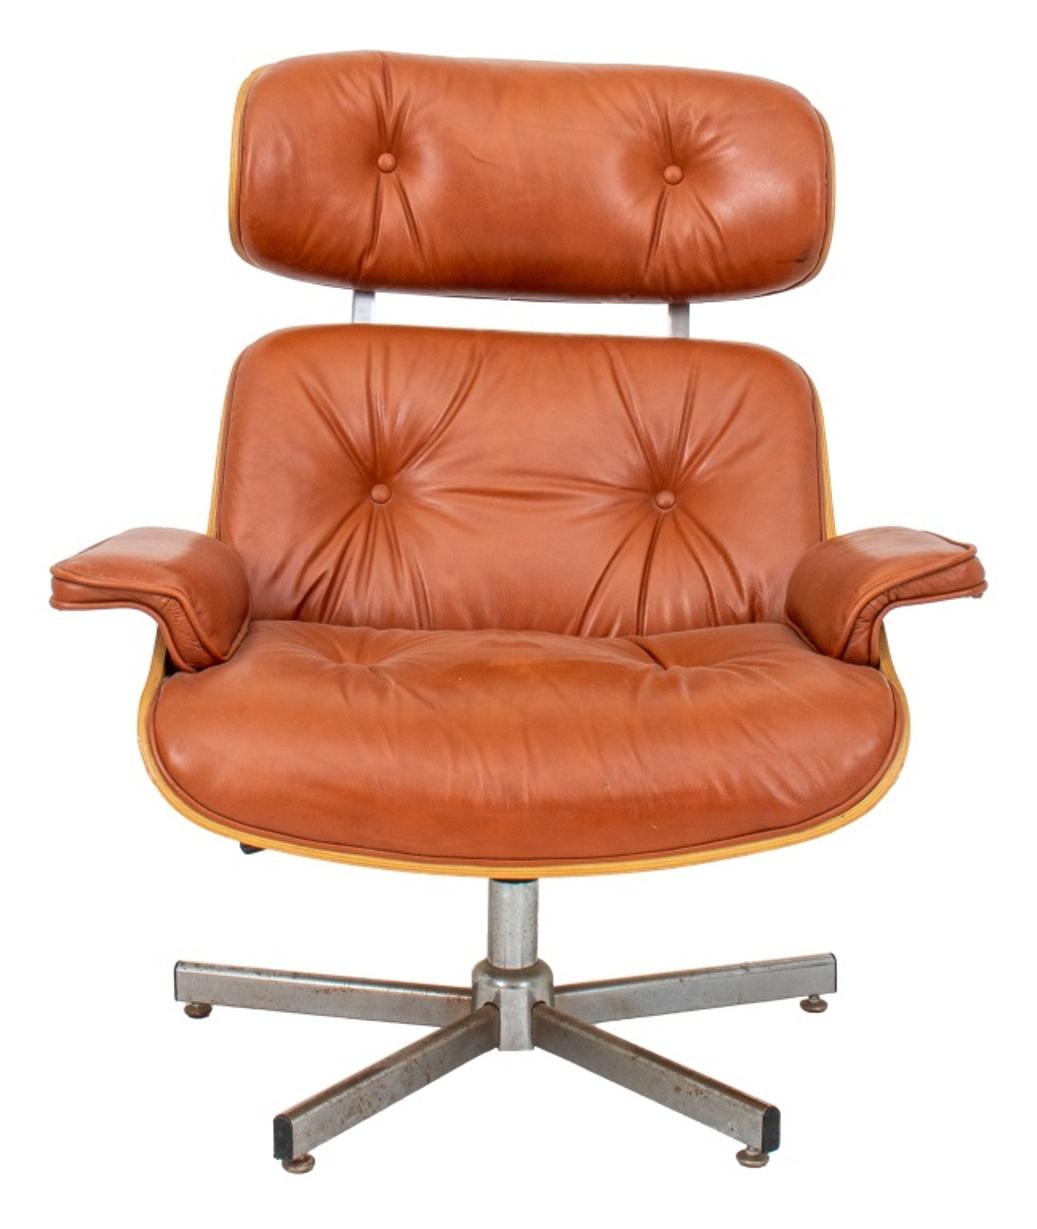 Charles Eames for Herman Miller manner cognac leather upholstered wood arm or desk chair on five wheels.

Dimensions: 29.5